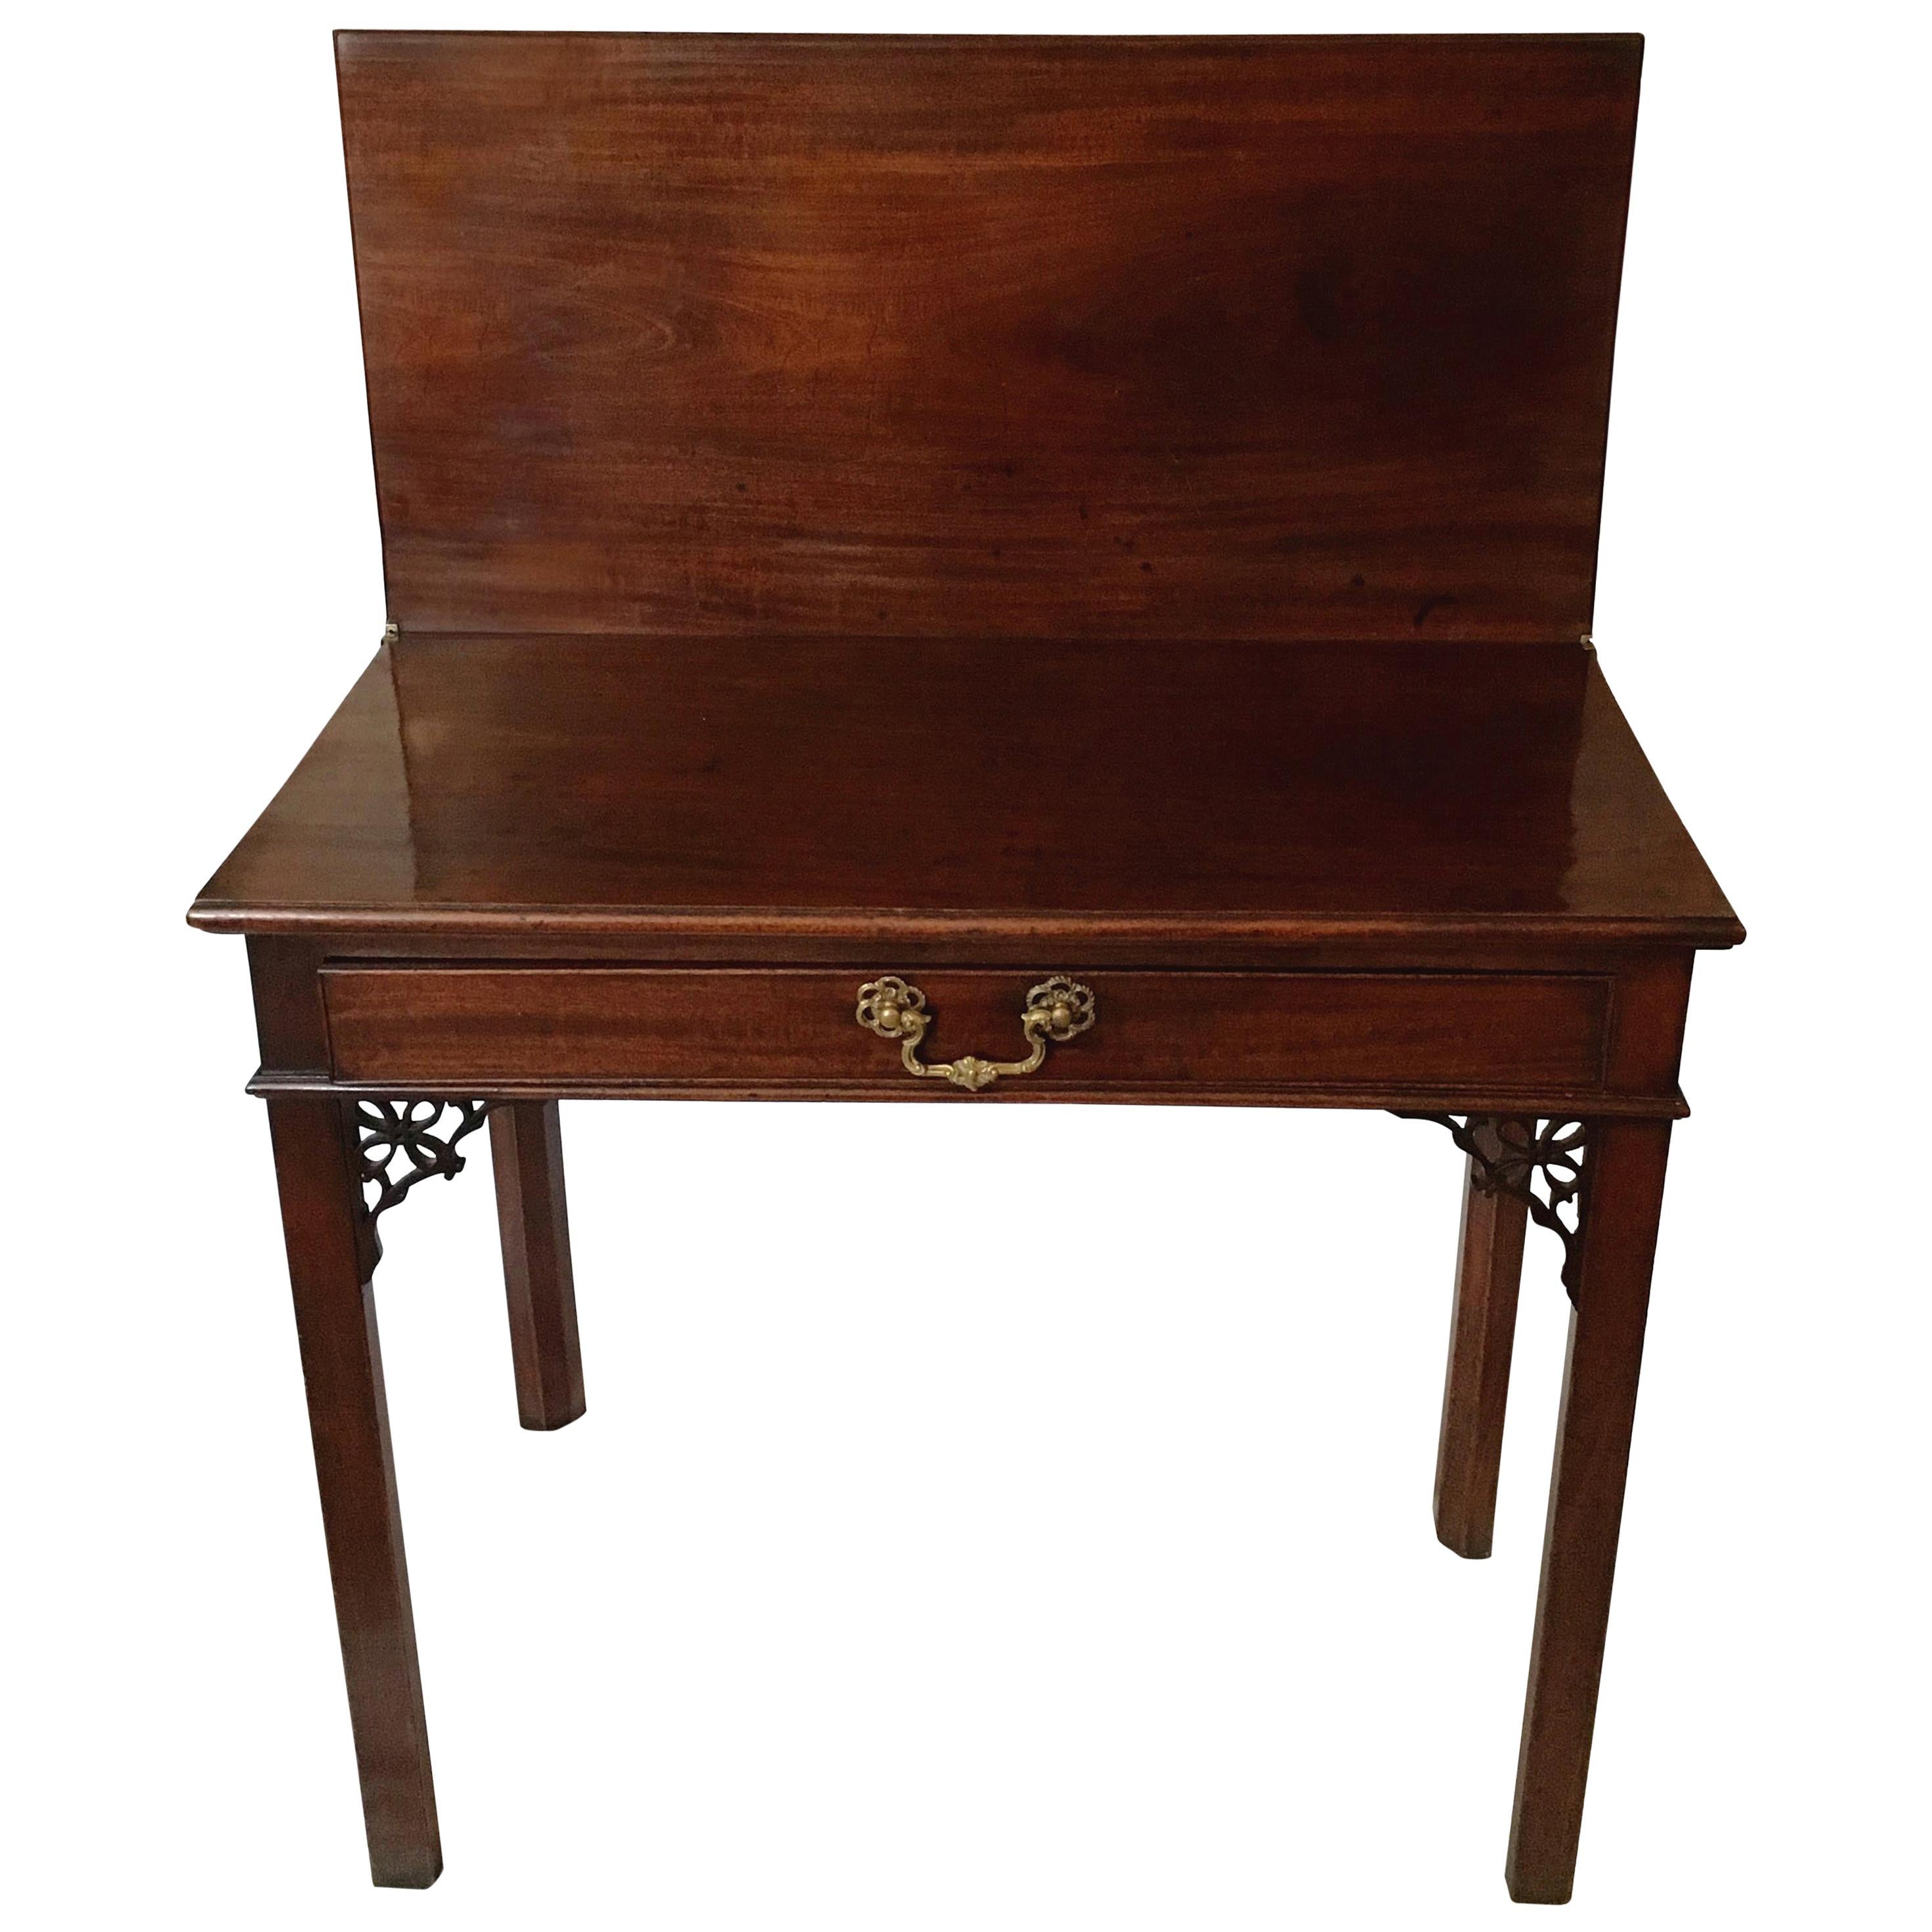 18th Century Chippendale Mahogany Card Table